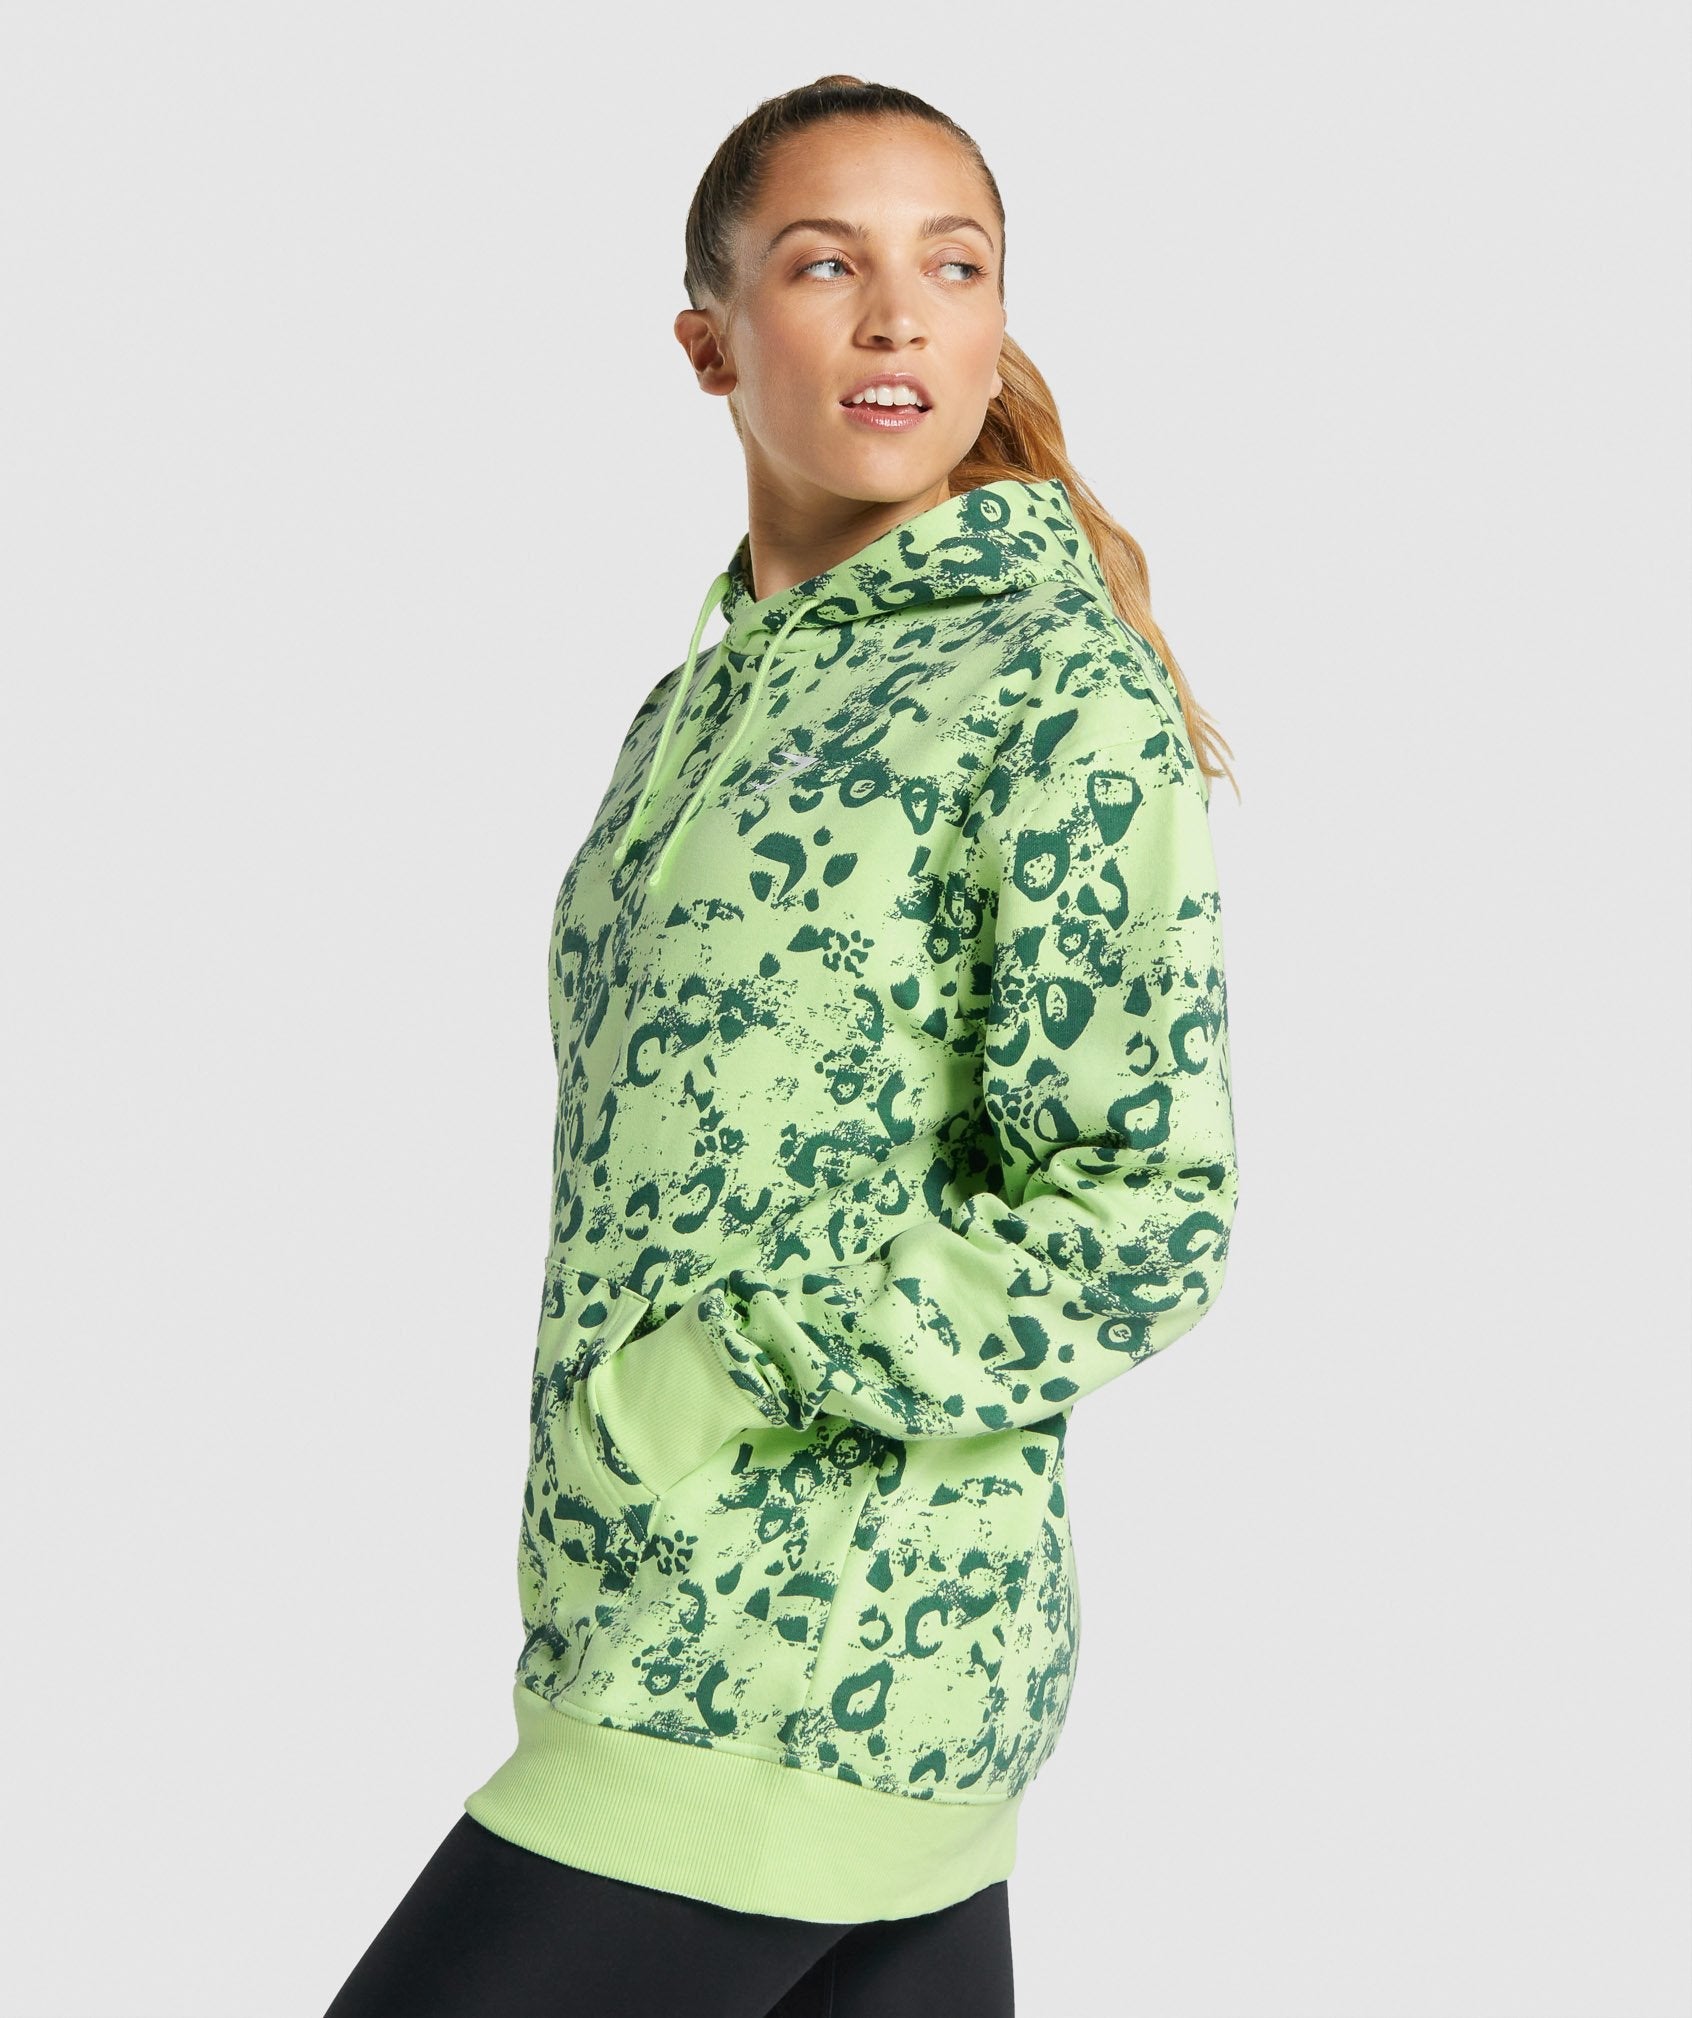 Animal Graphic Hoodie in Lime/Dark Green Print - view 3